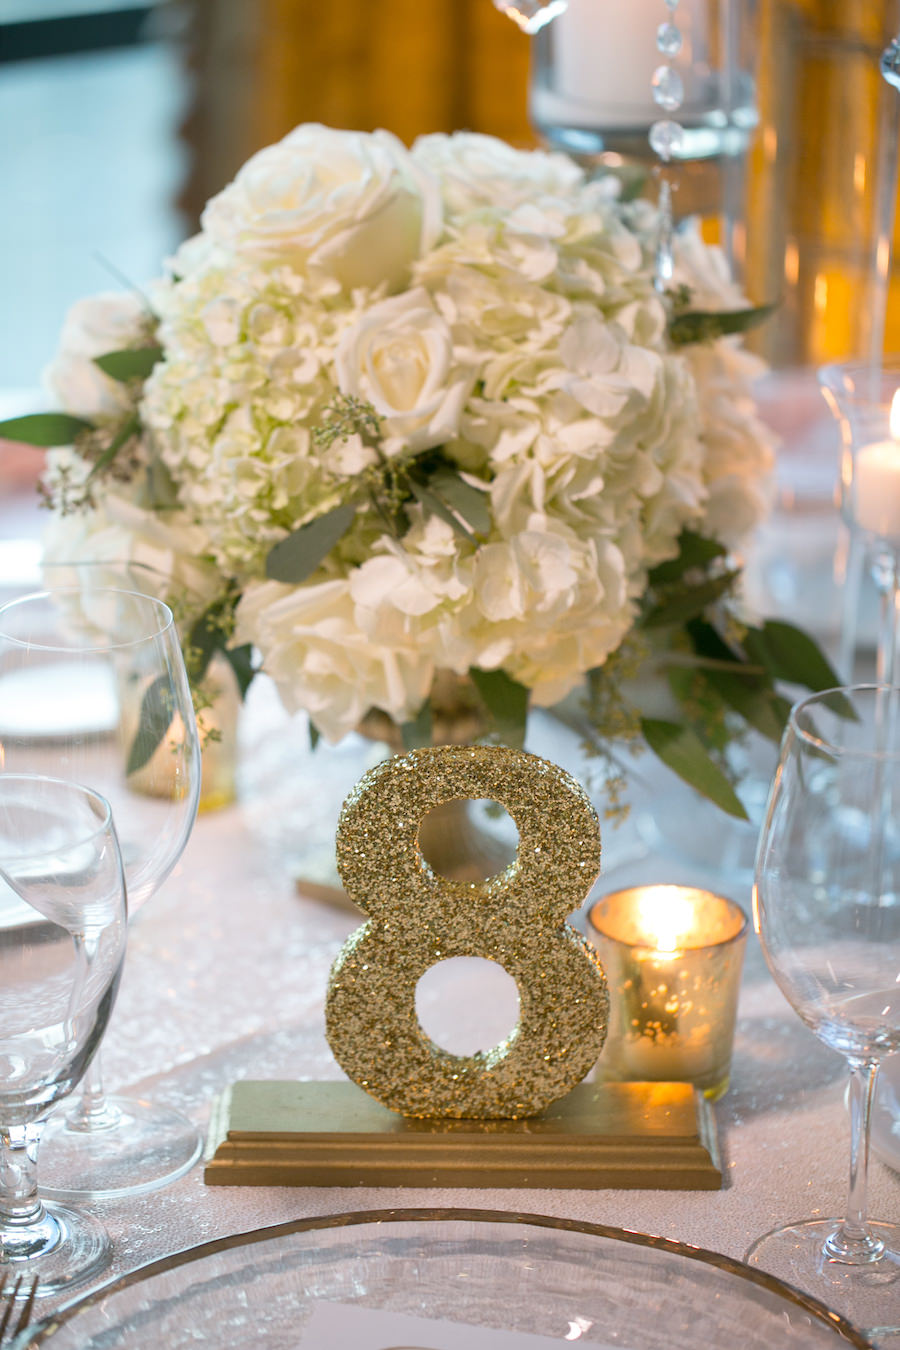 Short White Rose and Hydrangea Floral Wedding Centerpieces with Gold Glitter Table Numbers | Wedding Venue The Tampa Club | Tampa Wedding Photographer Carrie Wildes Photography | Tampa Wedding Florist Northside Florist